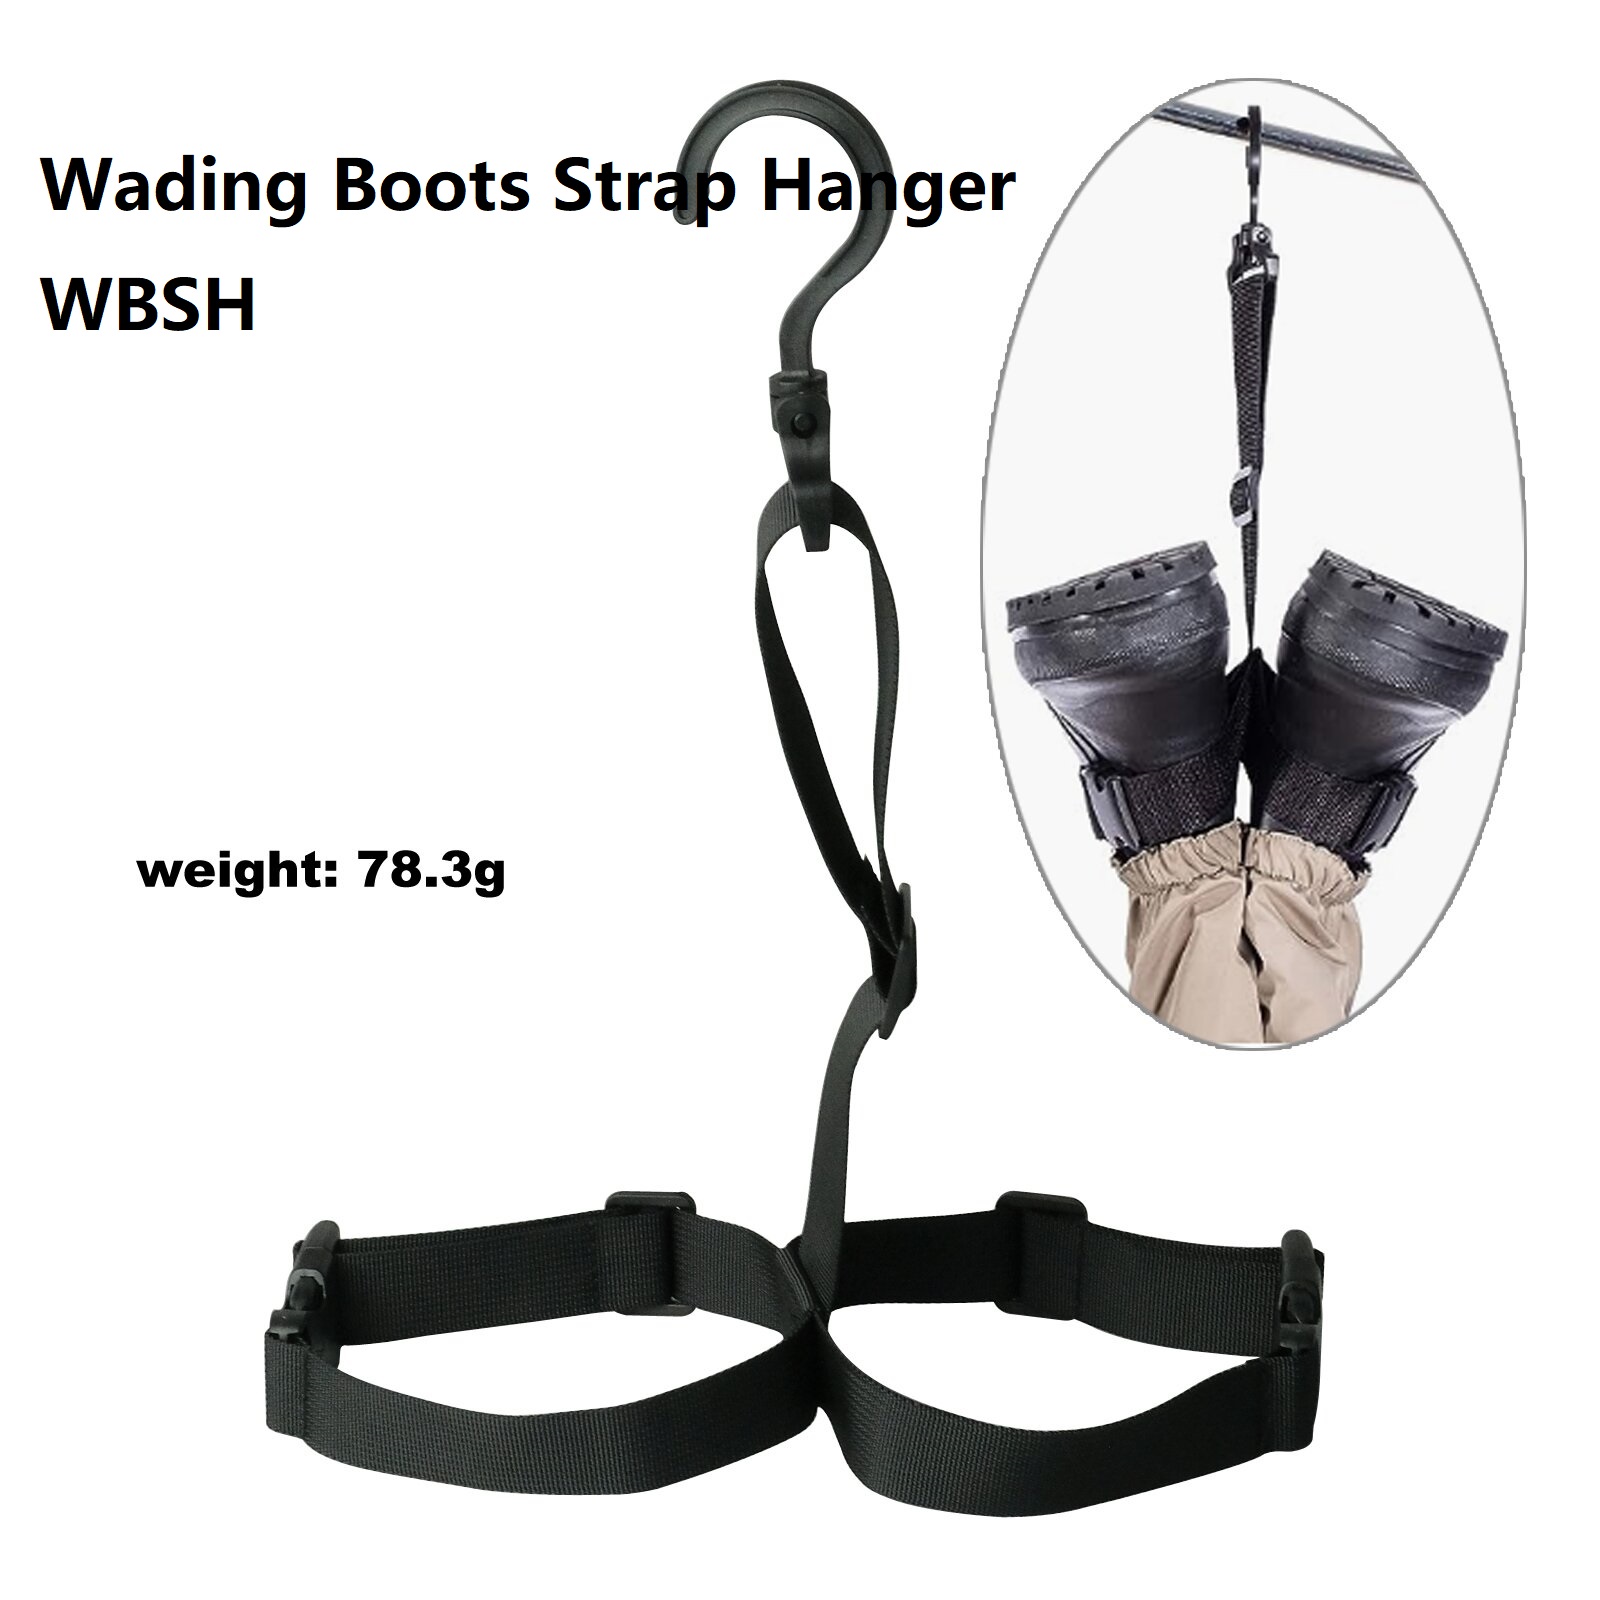 wading boots strap hanger wbsh